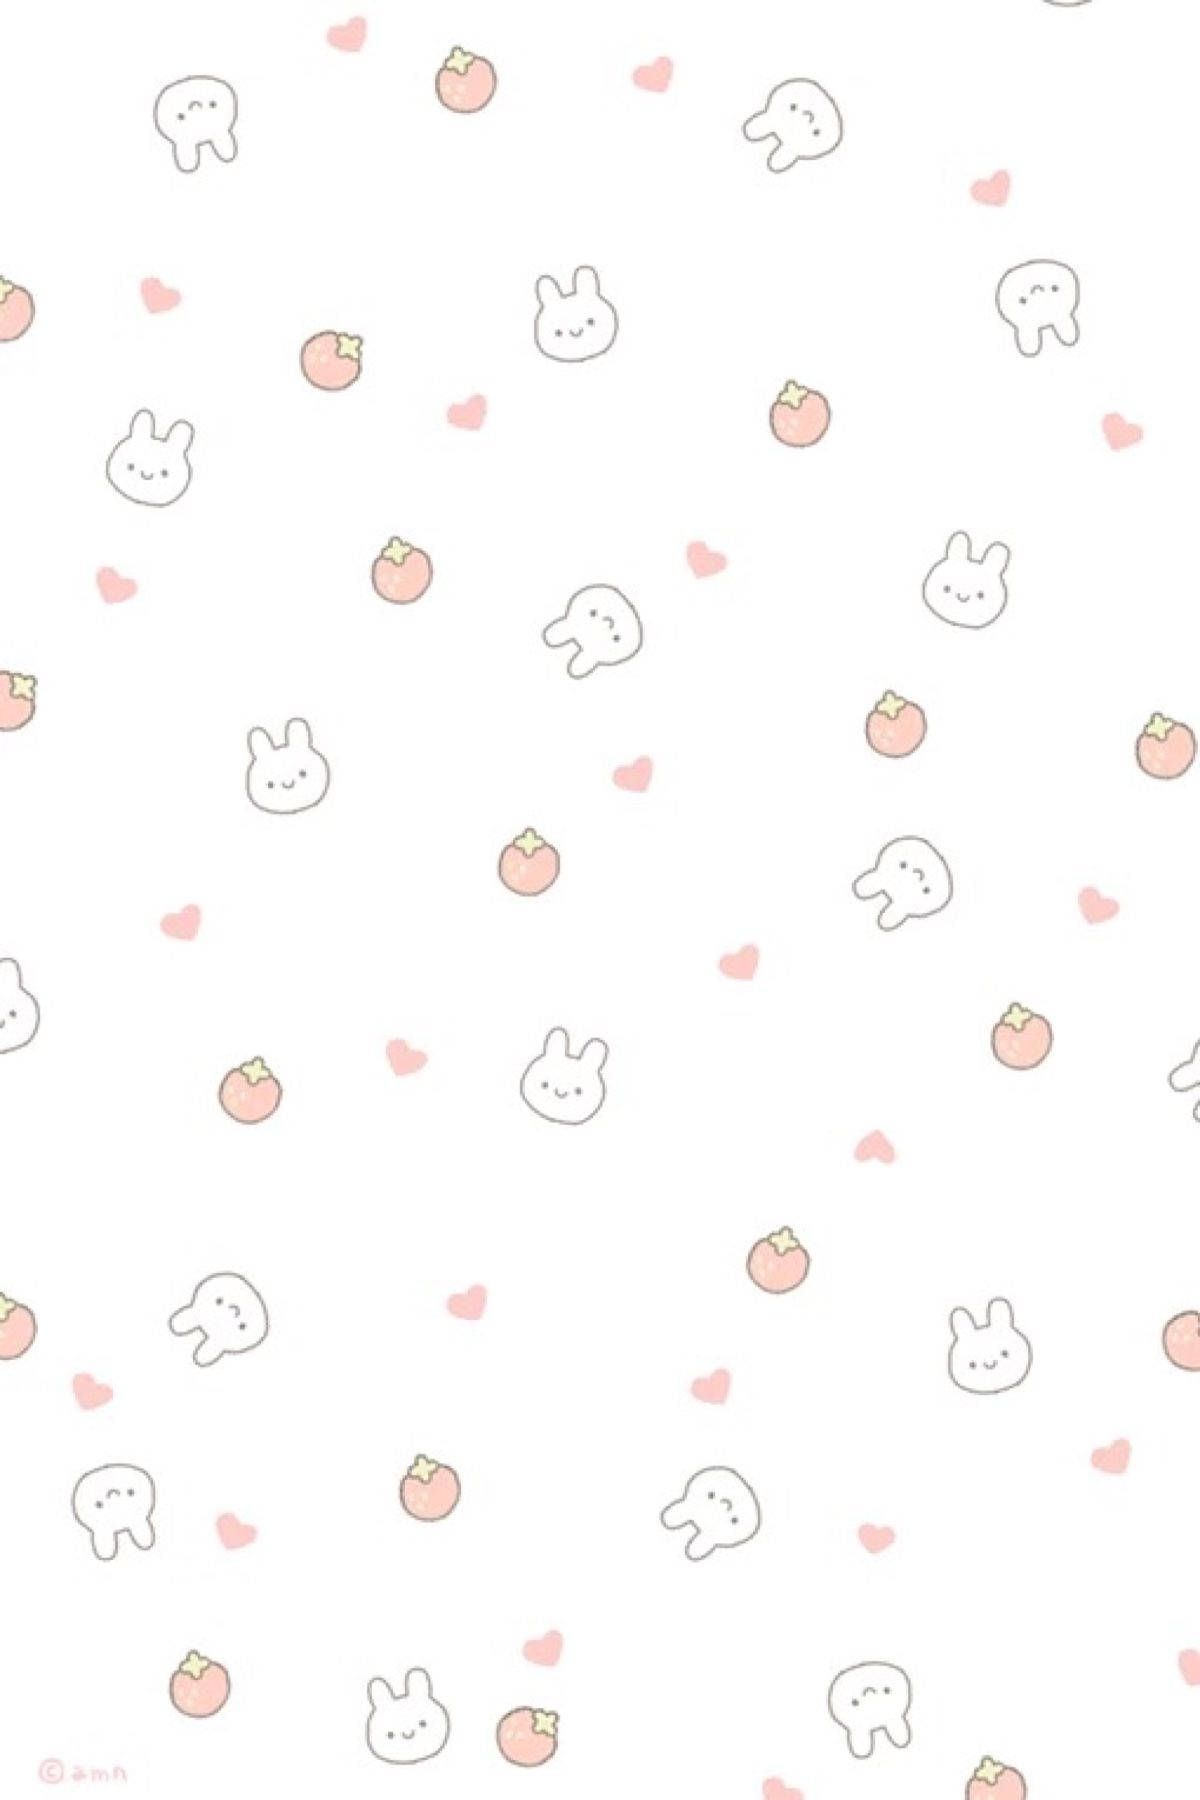 Cute Rabbits And Strawberries Pattern Wallpaper